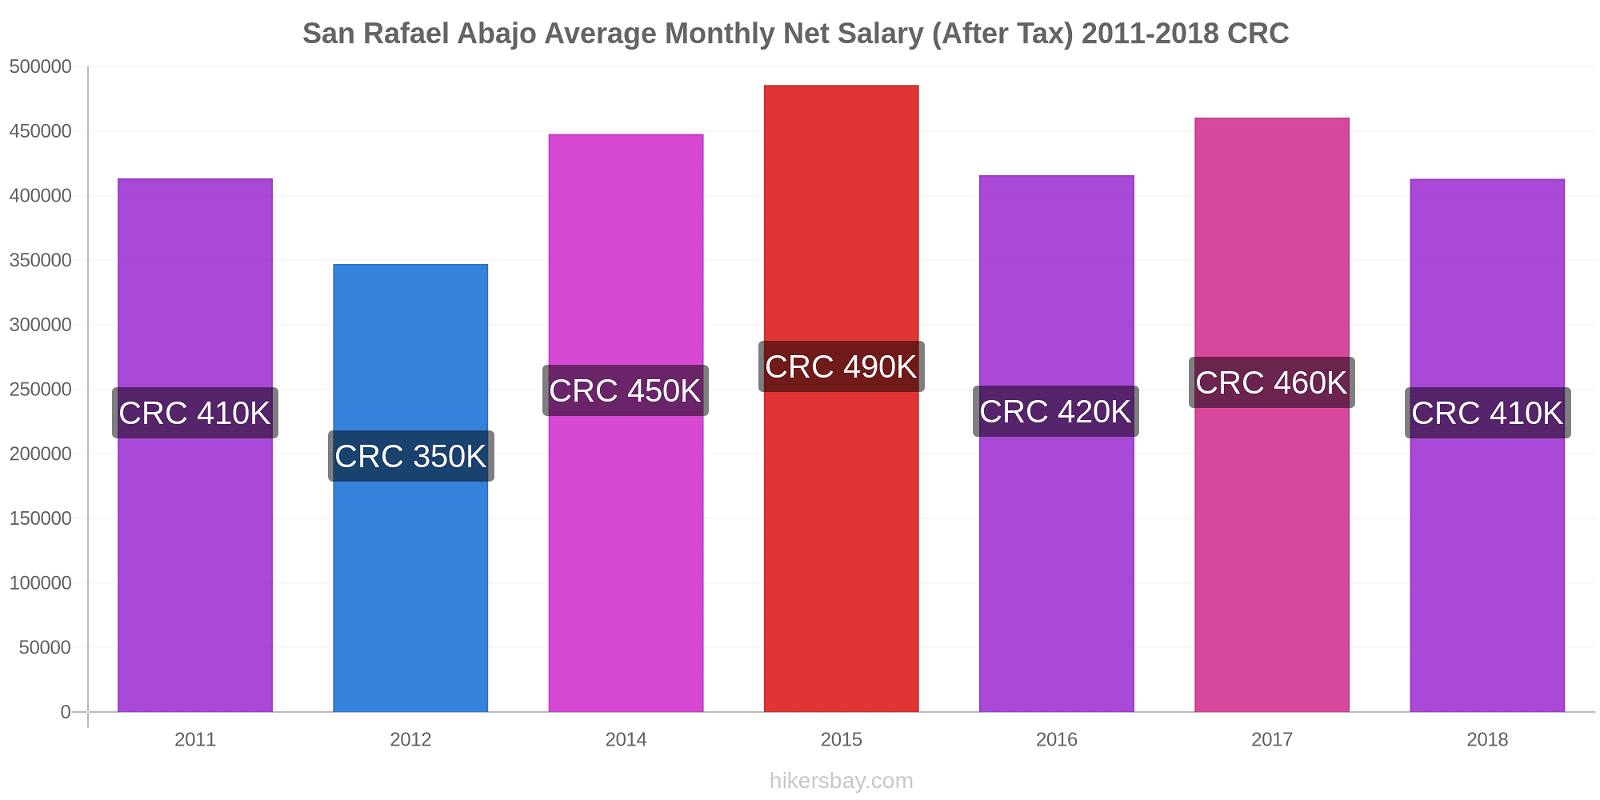 San Rafael Abajo price changes Average Monthly Net Salary (After Tax) hikersbay.com